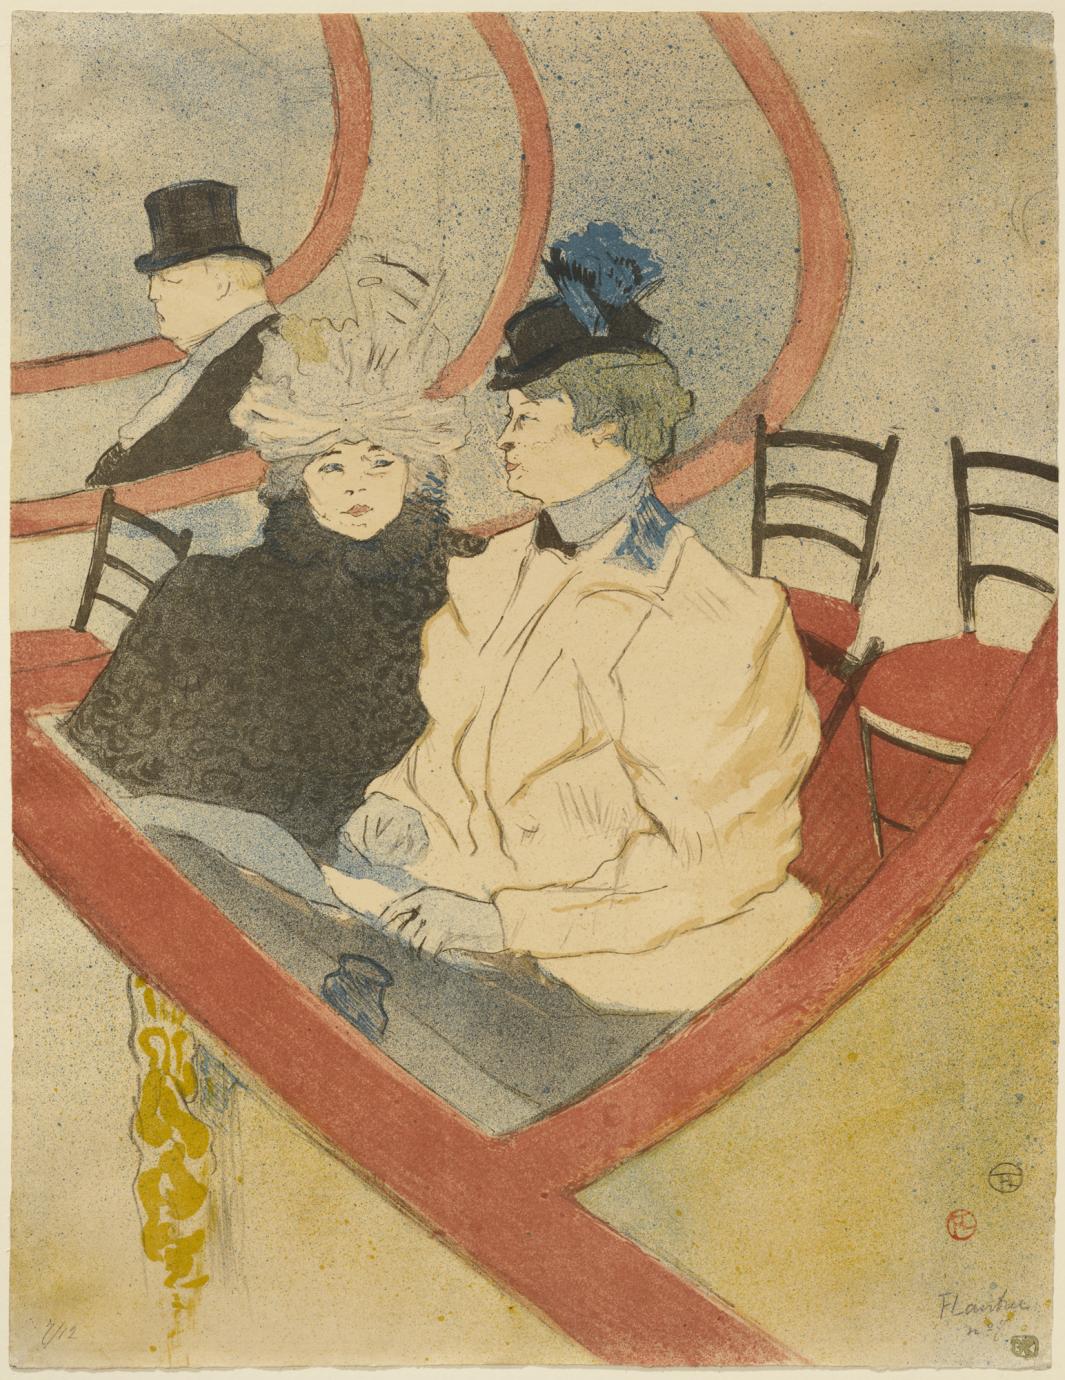 Color print of two women, in coats and hats, seated in a theater box, with a man in an adjoining box